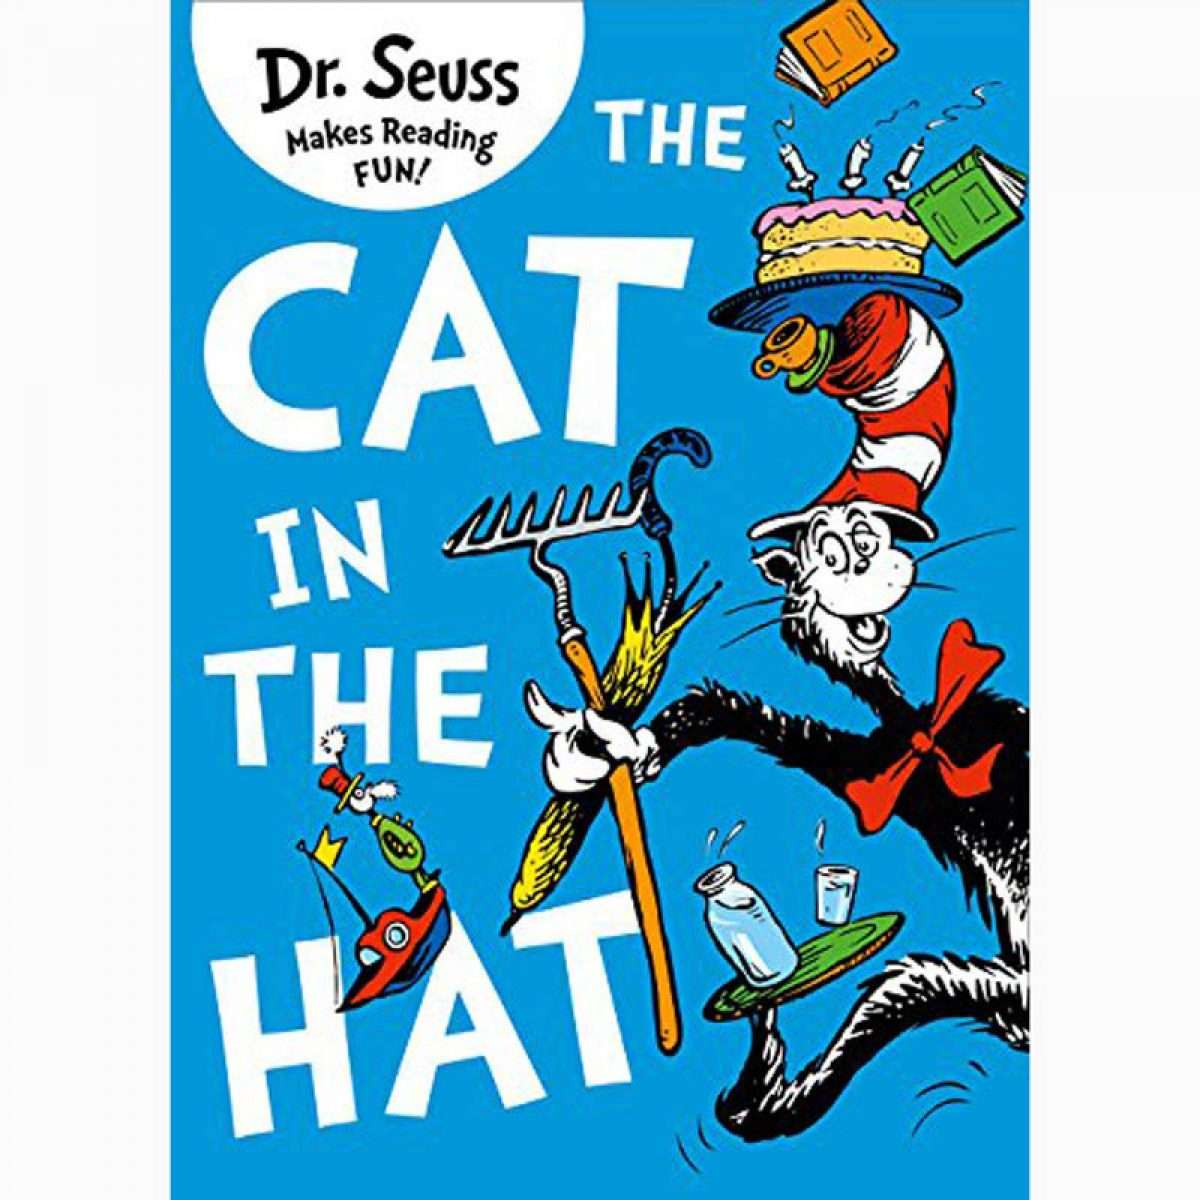 The Cat In The Hat By Dr. Seuss